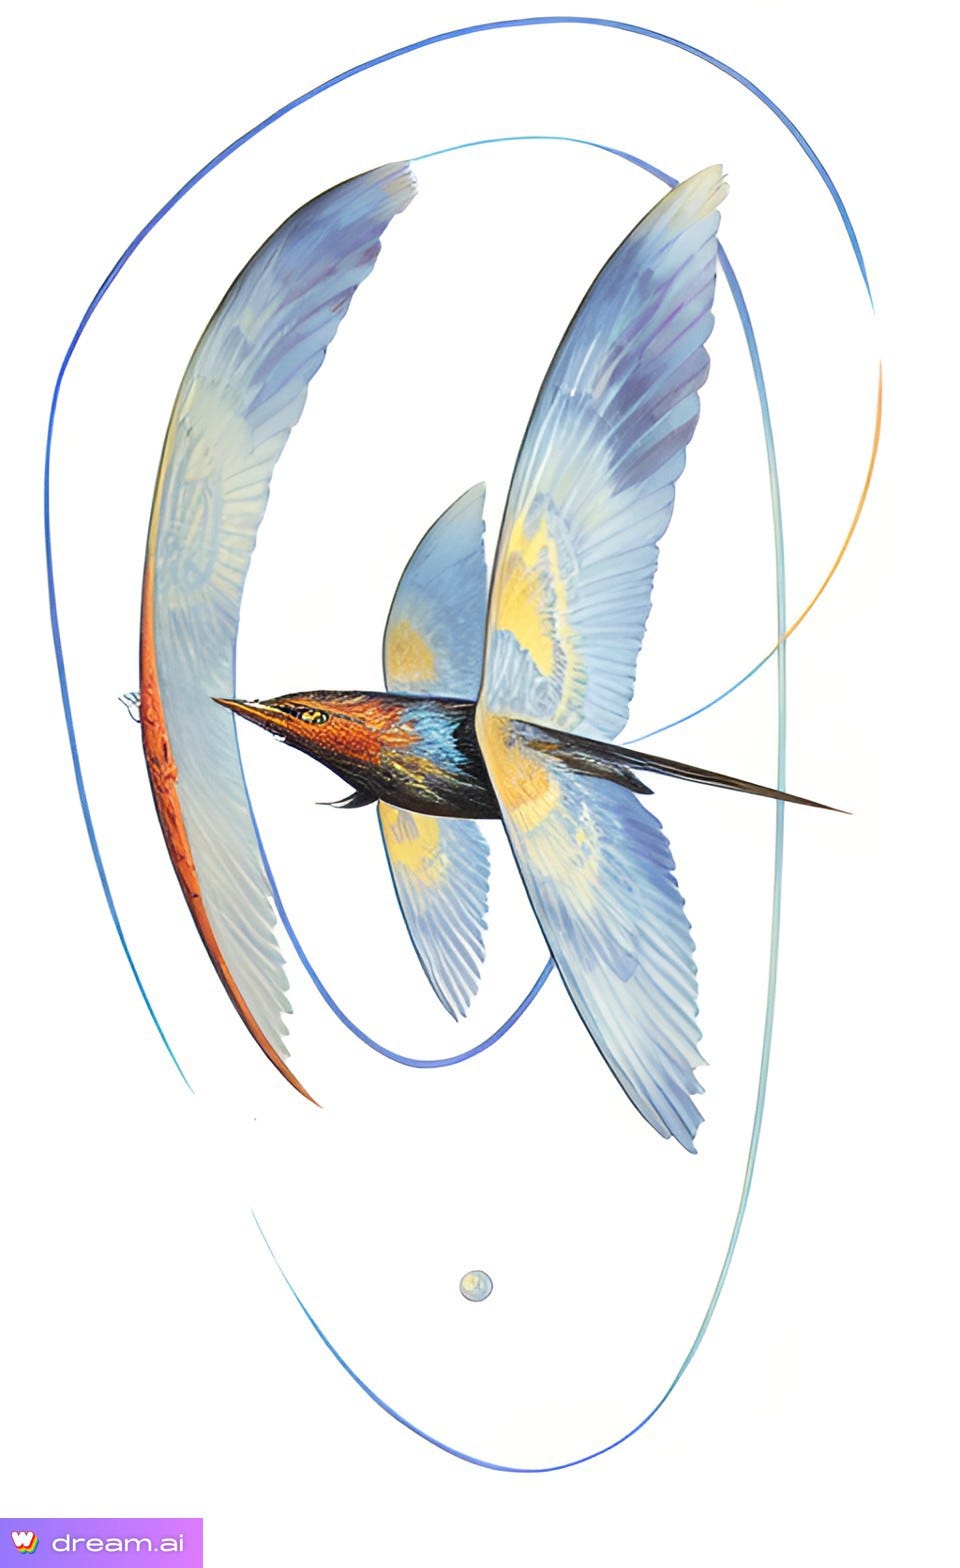 AI illustration of a darting hummingbird leaving a trail of colored light in the shape of the outline of an ear